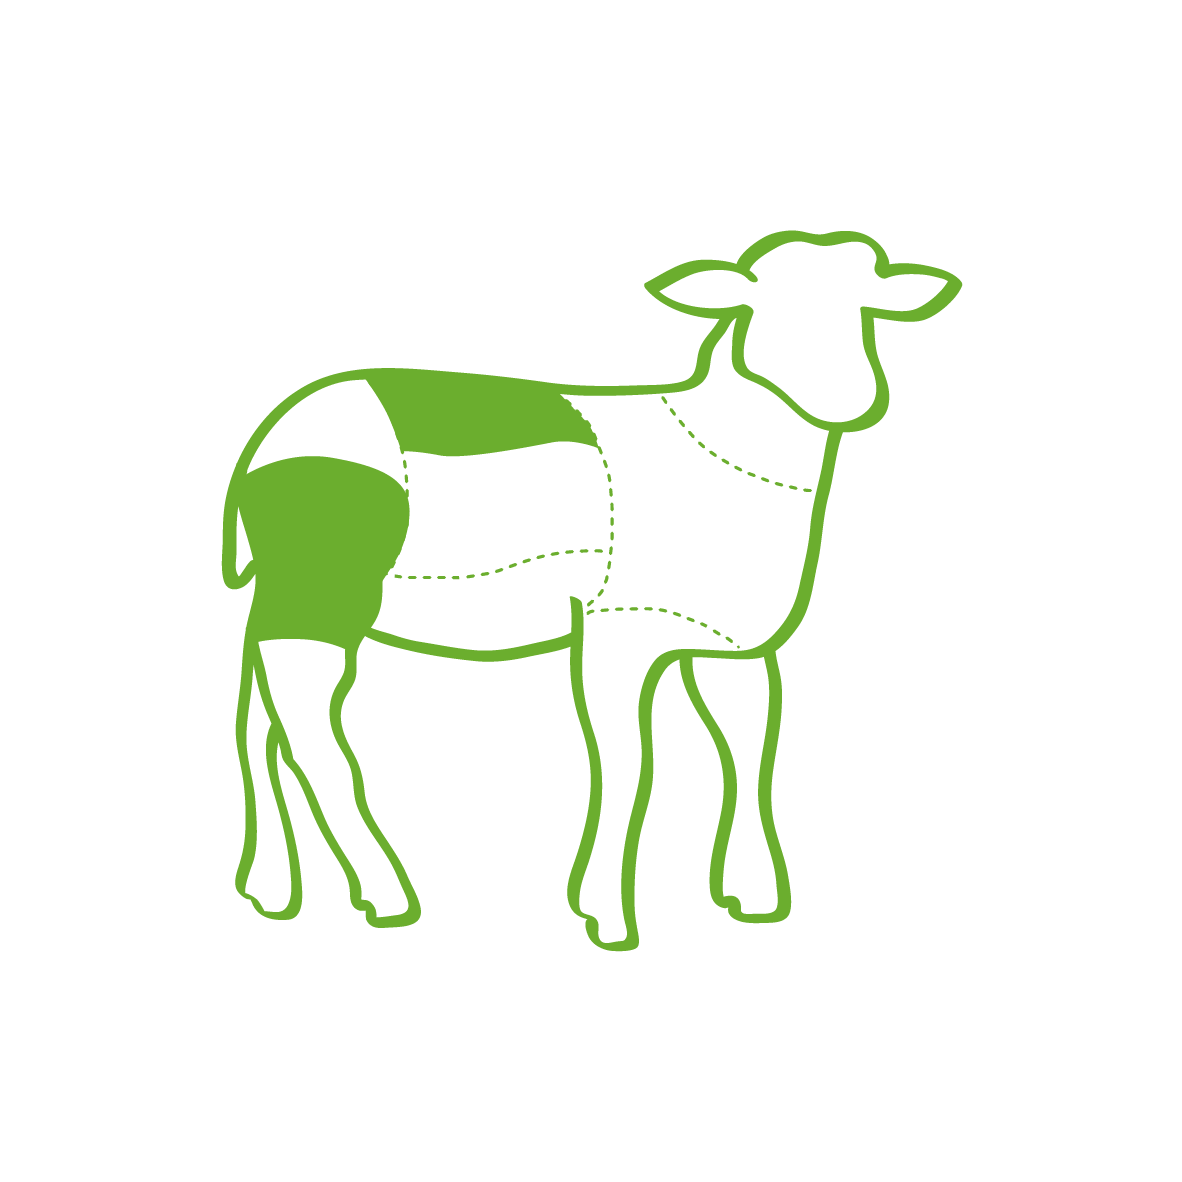 Illustration of a lamb highlighting where the lamb stir-fry comes from